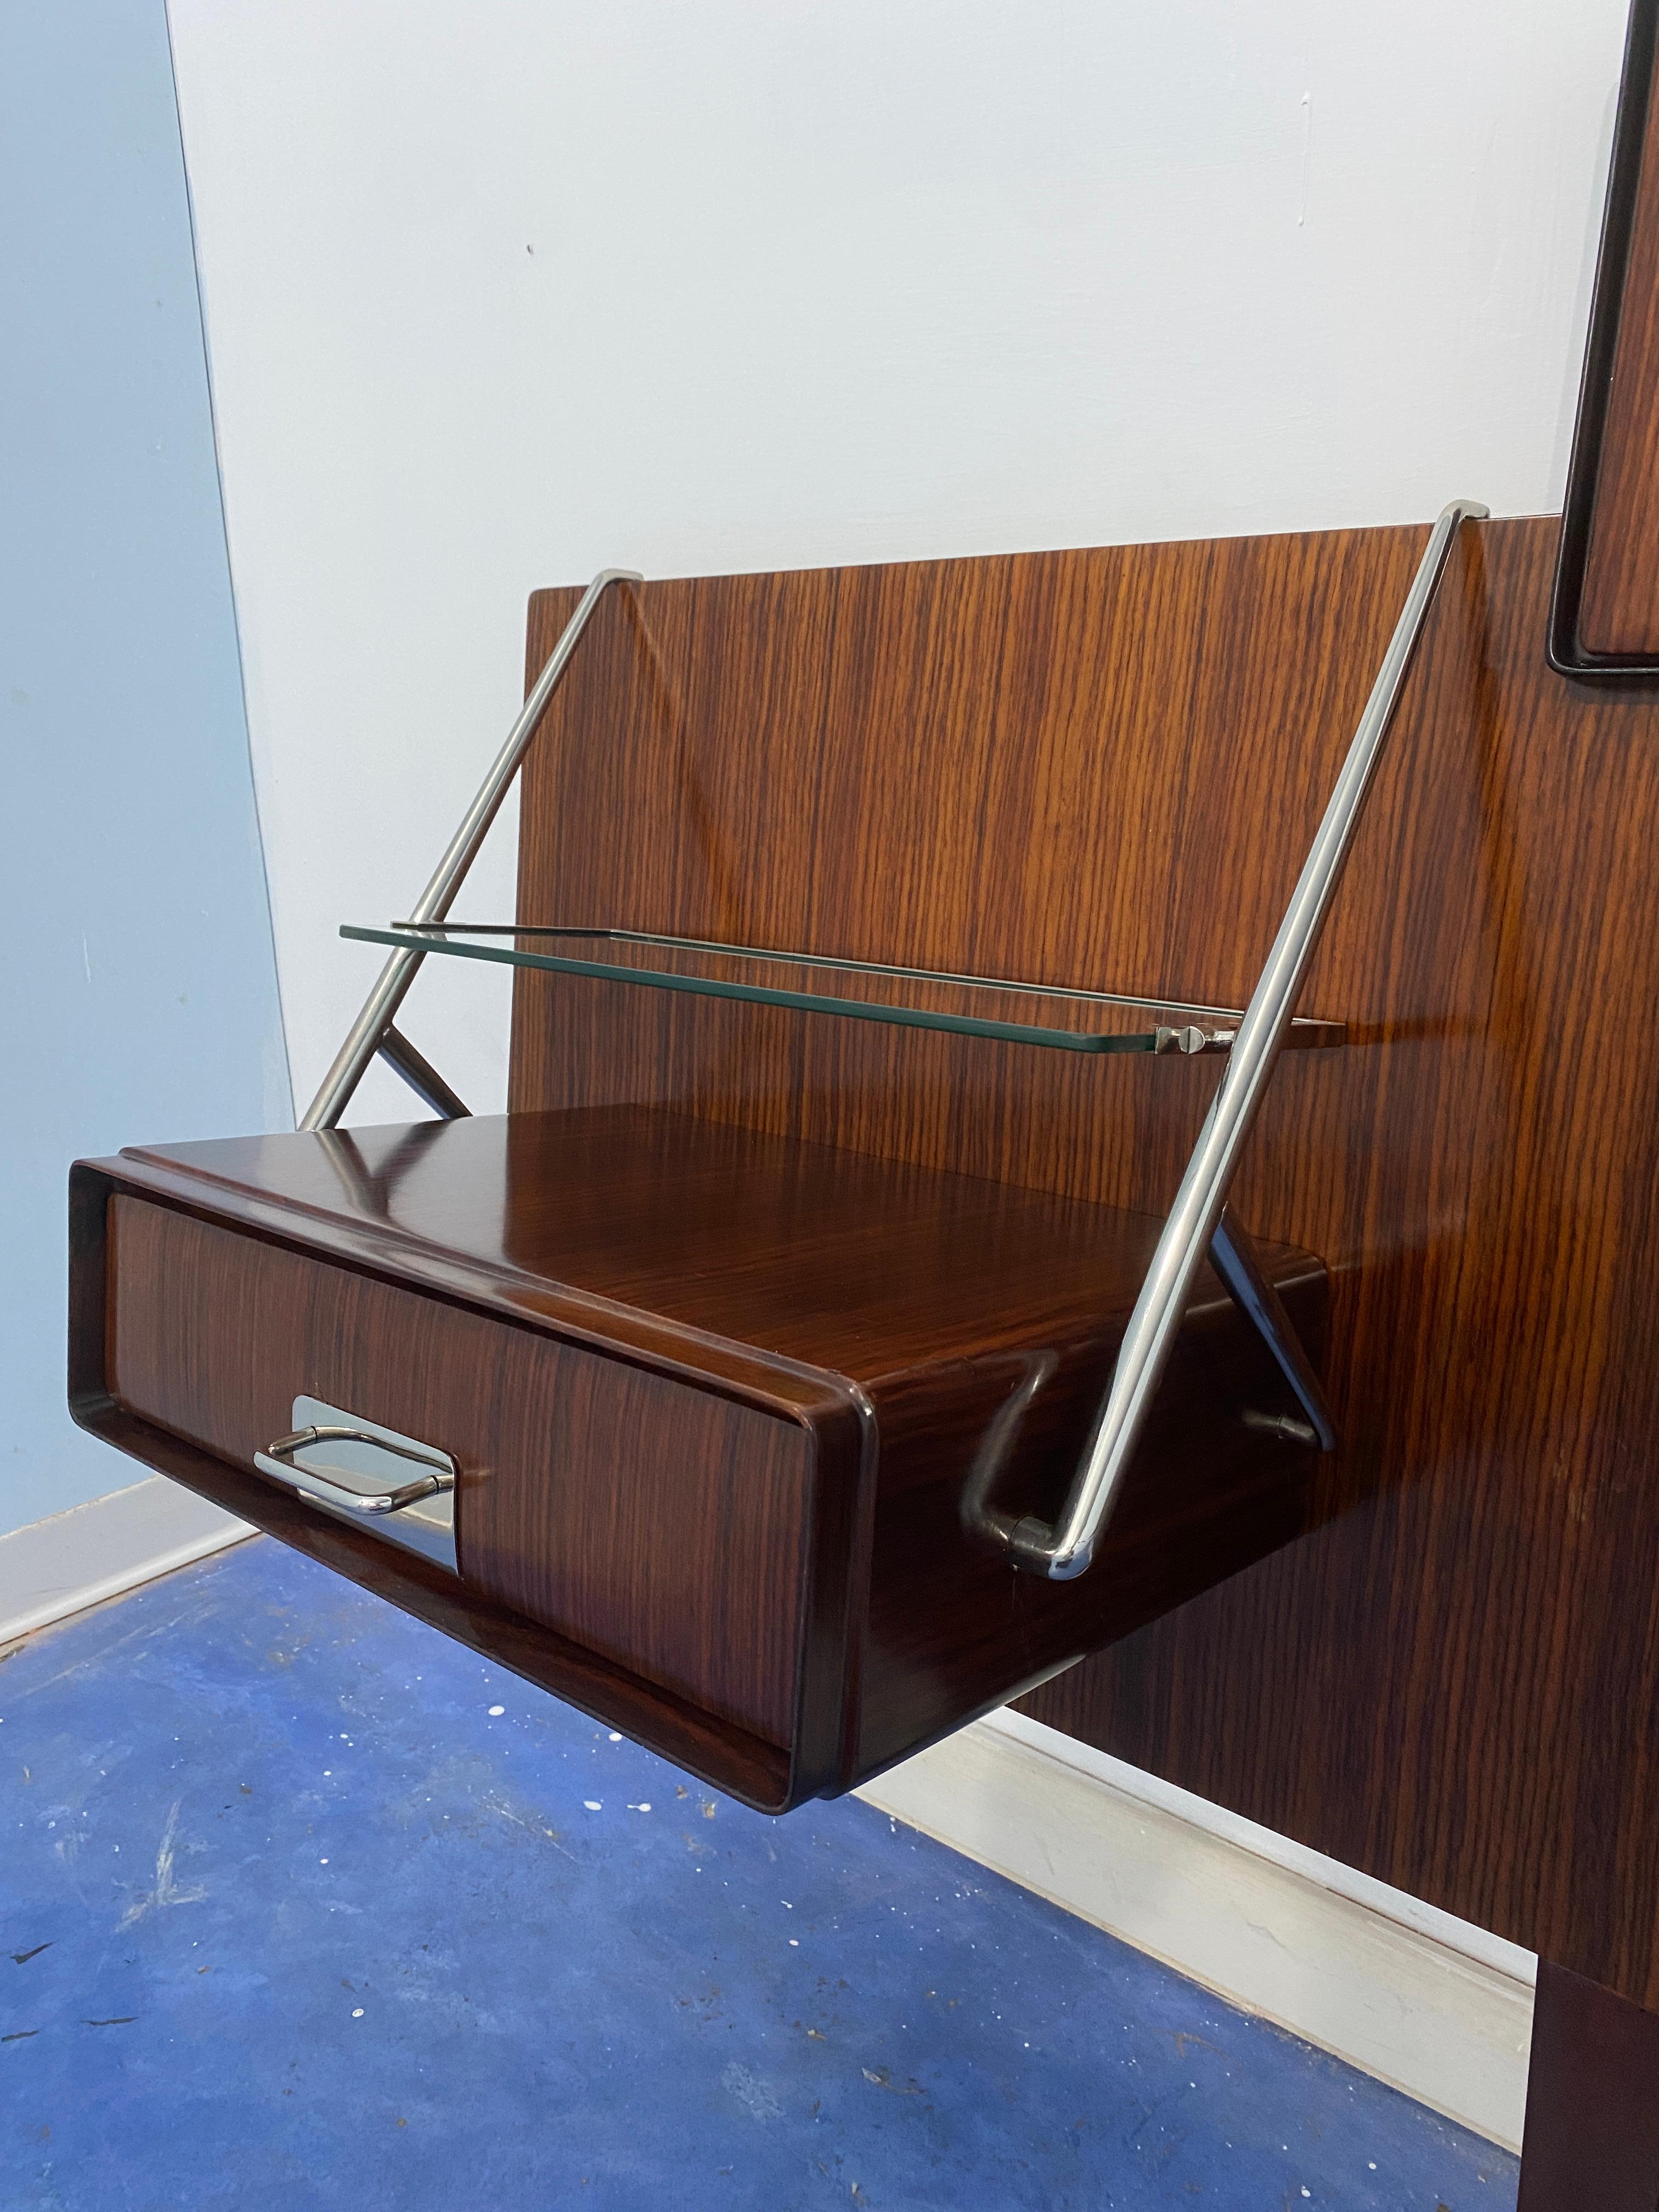 Italian nightstands from the 1950s with headboard bed designed by Silvio Cavatorta 8